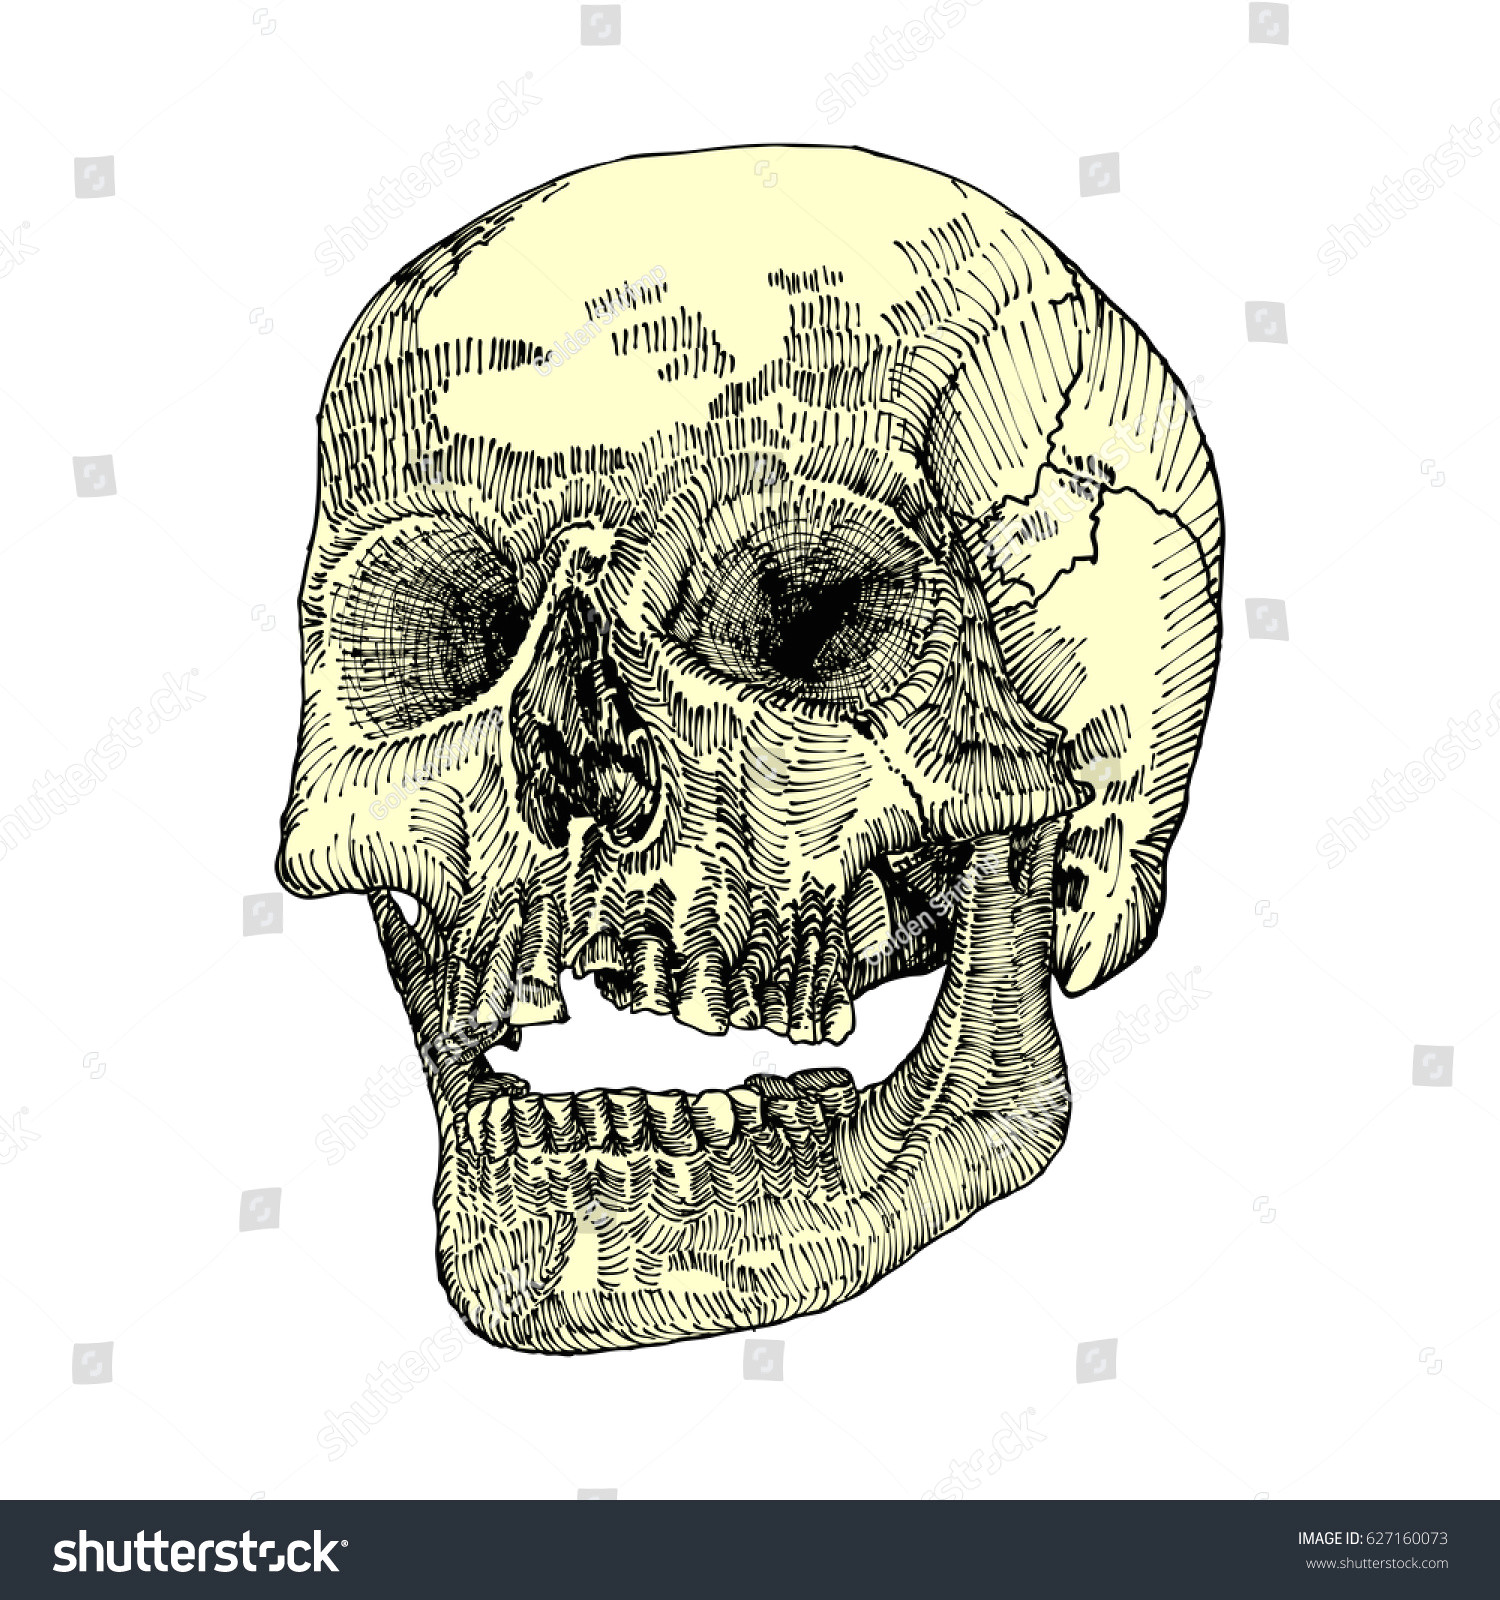 Skull Drawing Detailed Royalty Free Stock Illustration Of Anatomic Skull Open Mouth Jaw